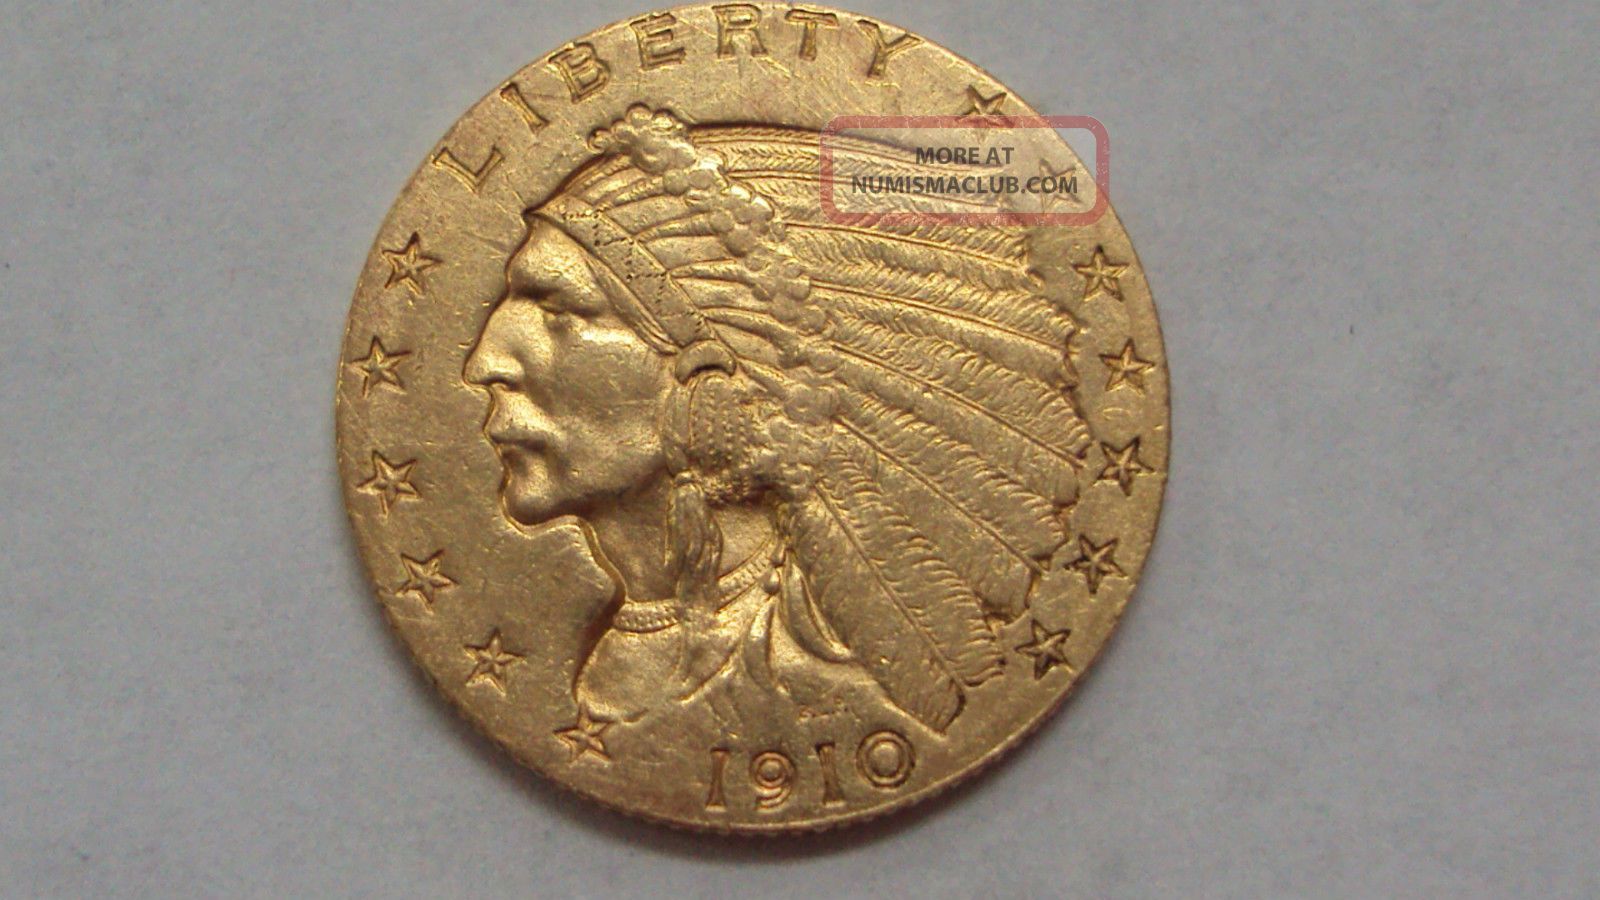 Coinhunters - 1910 Indian Head $2 - 1/2 Gold Quarter Eagle - Almost